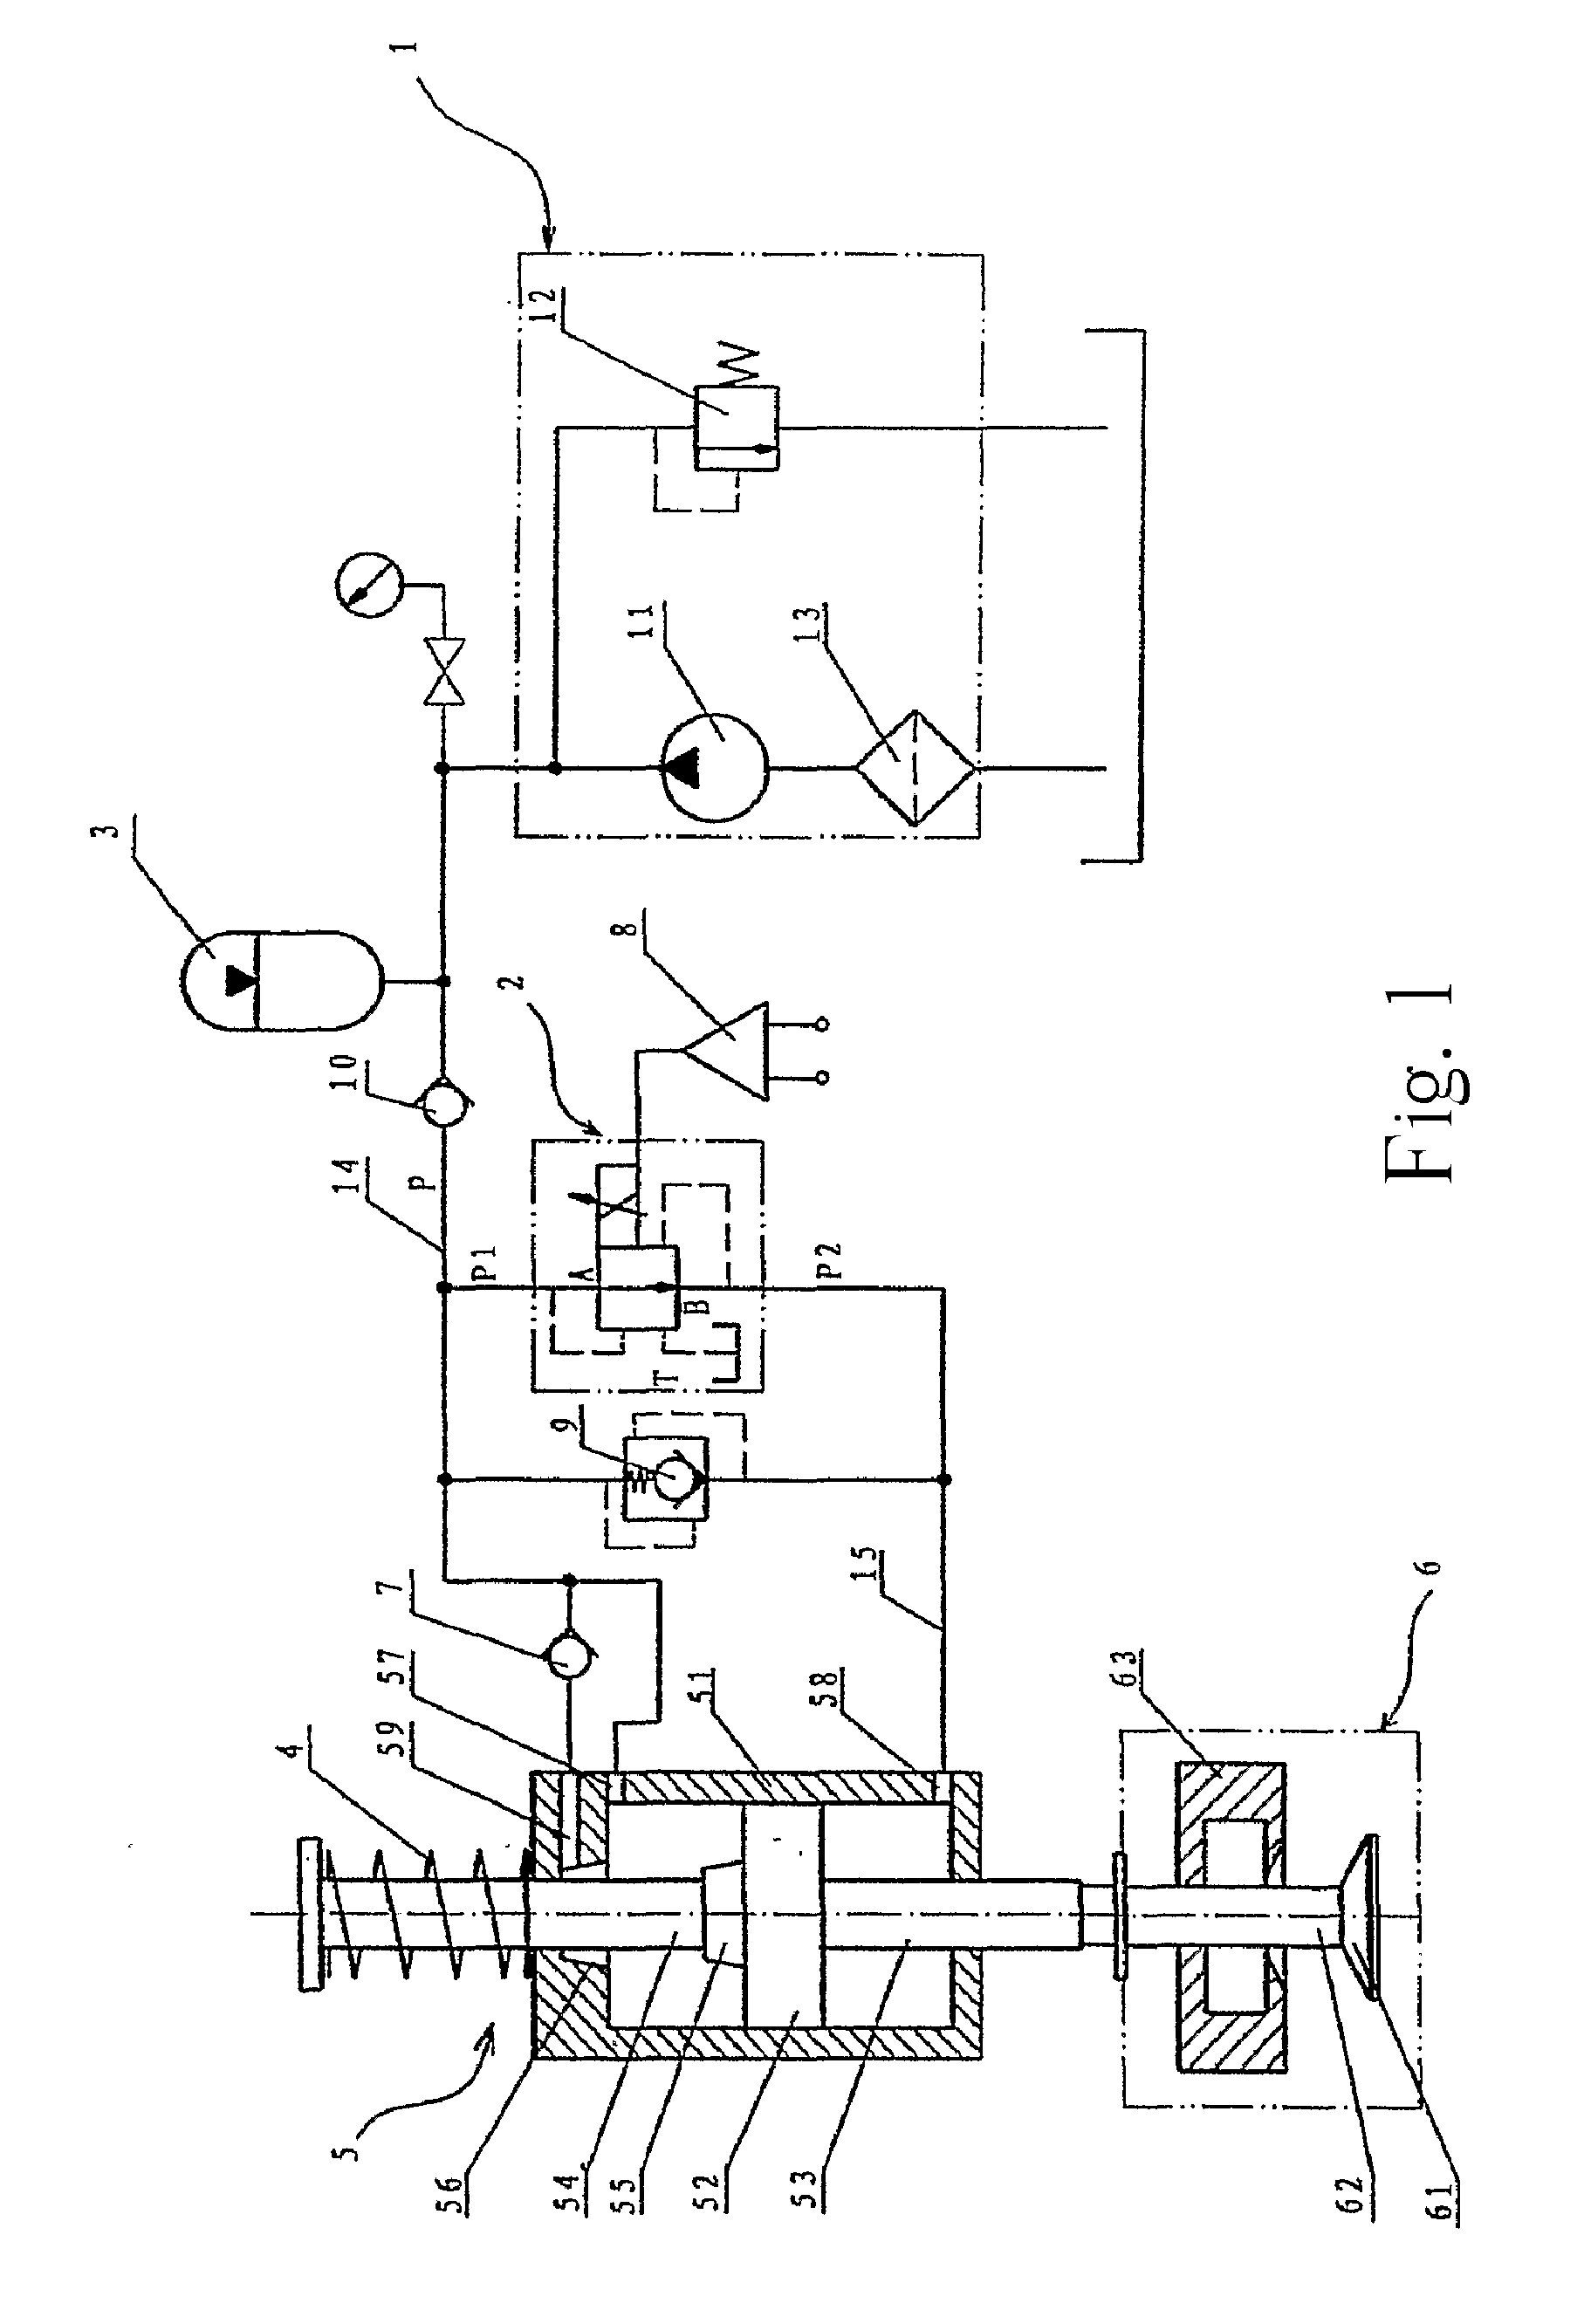 Variable engine valve control system with pressure difference